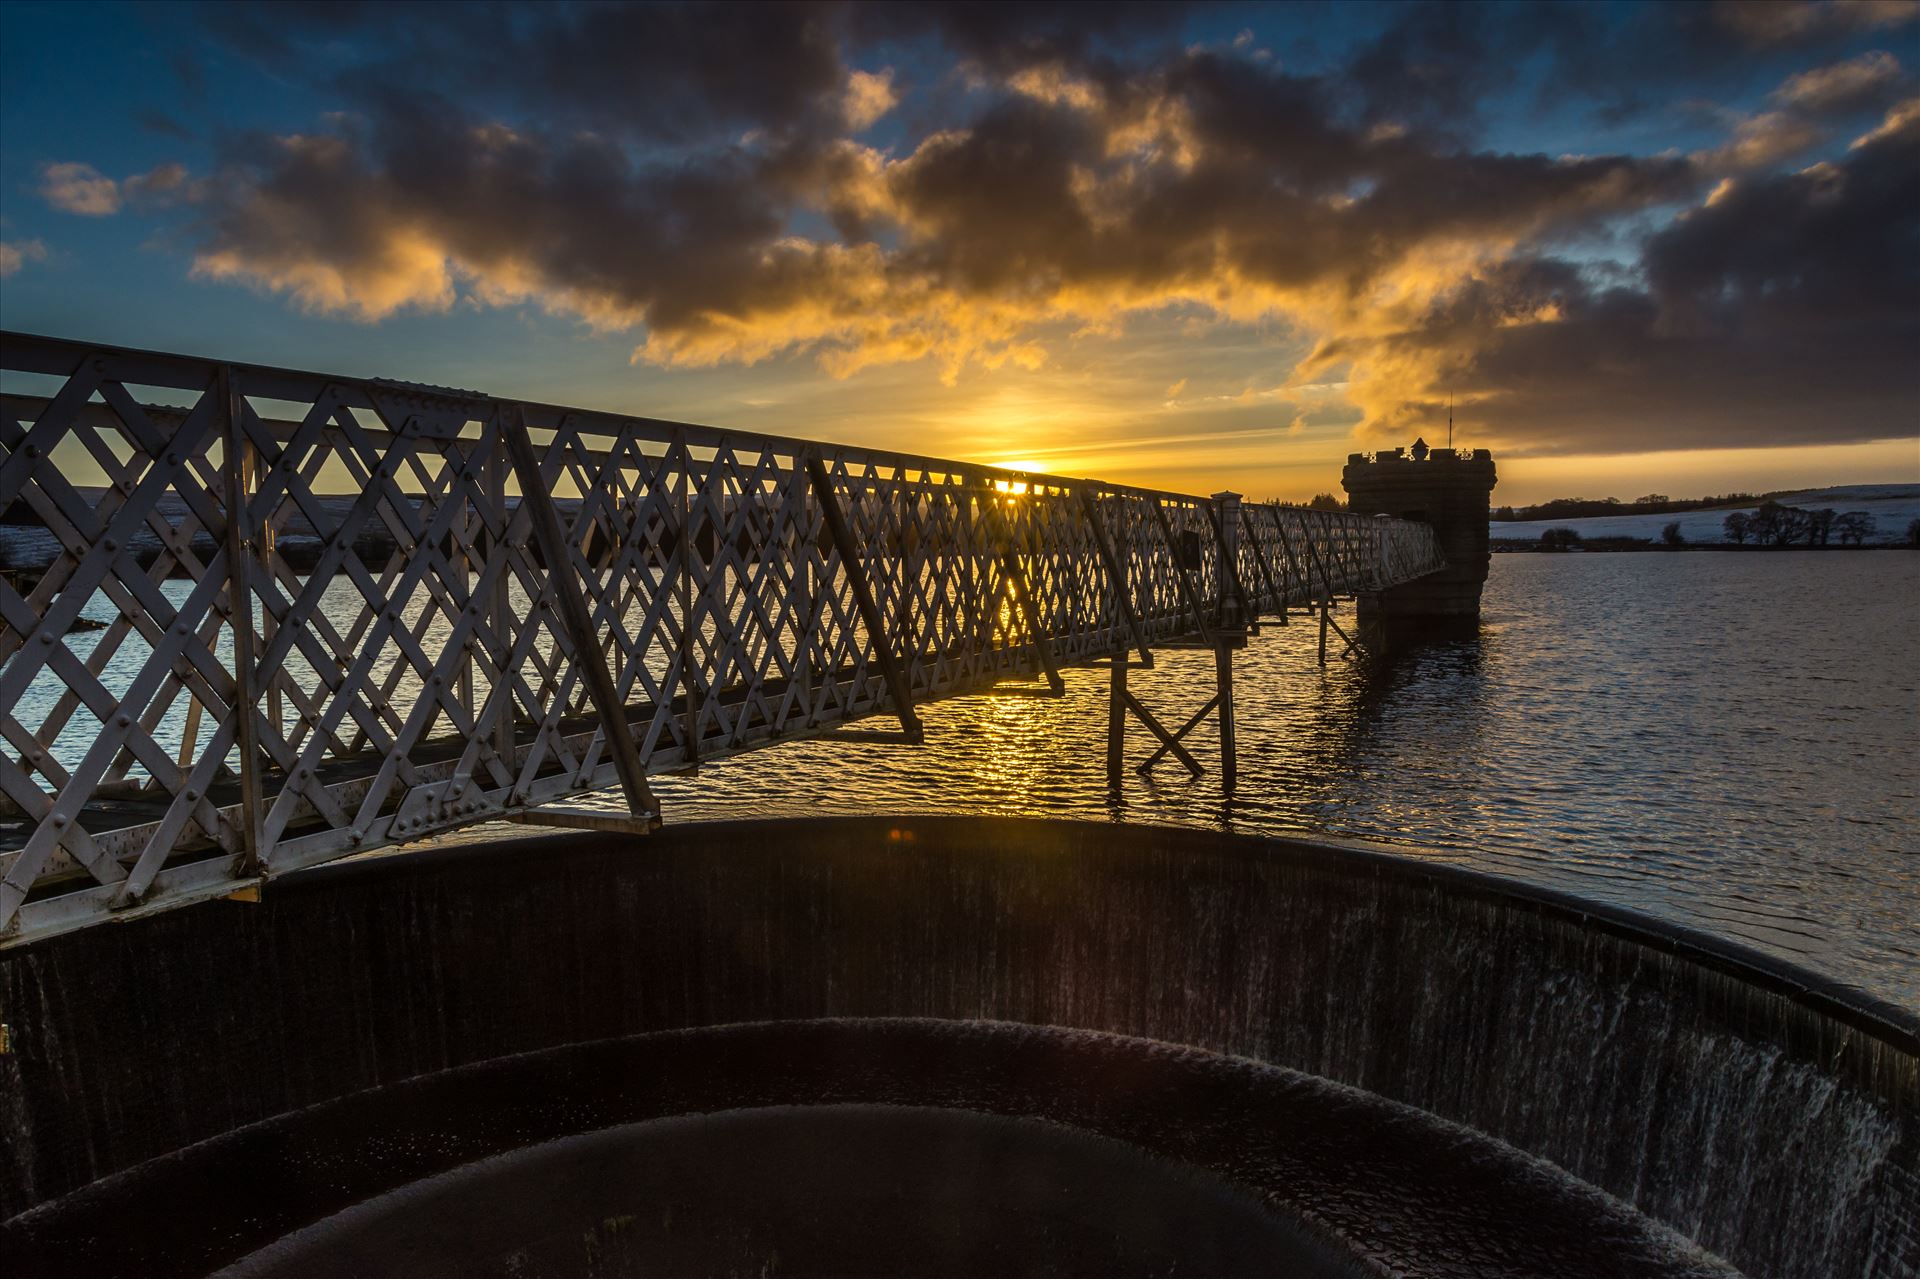 Sunset at Fontburn Reservoir, Northumberland.  by philreay